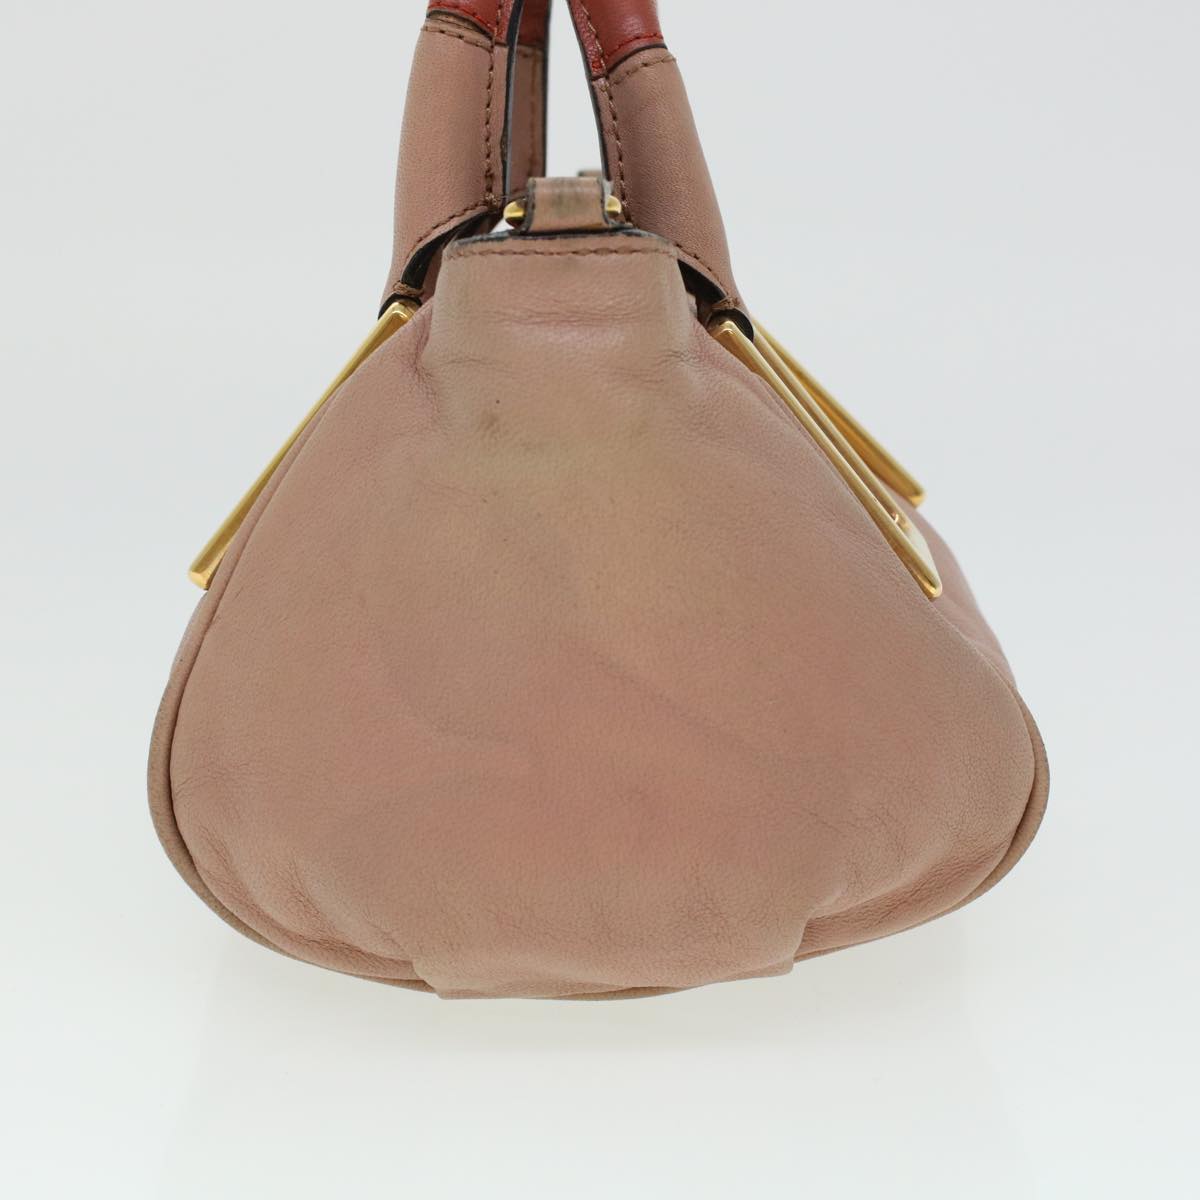 Chloe Etel Hand Bag Leather 2way Pink 04-12-50-65 Auth 43906